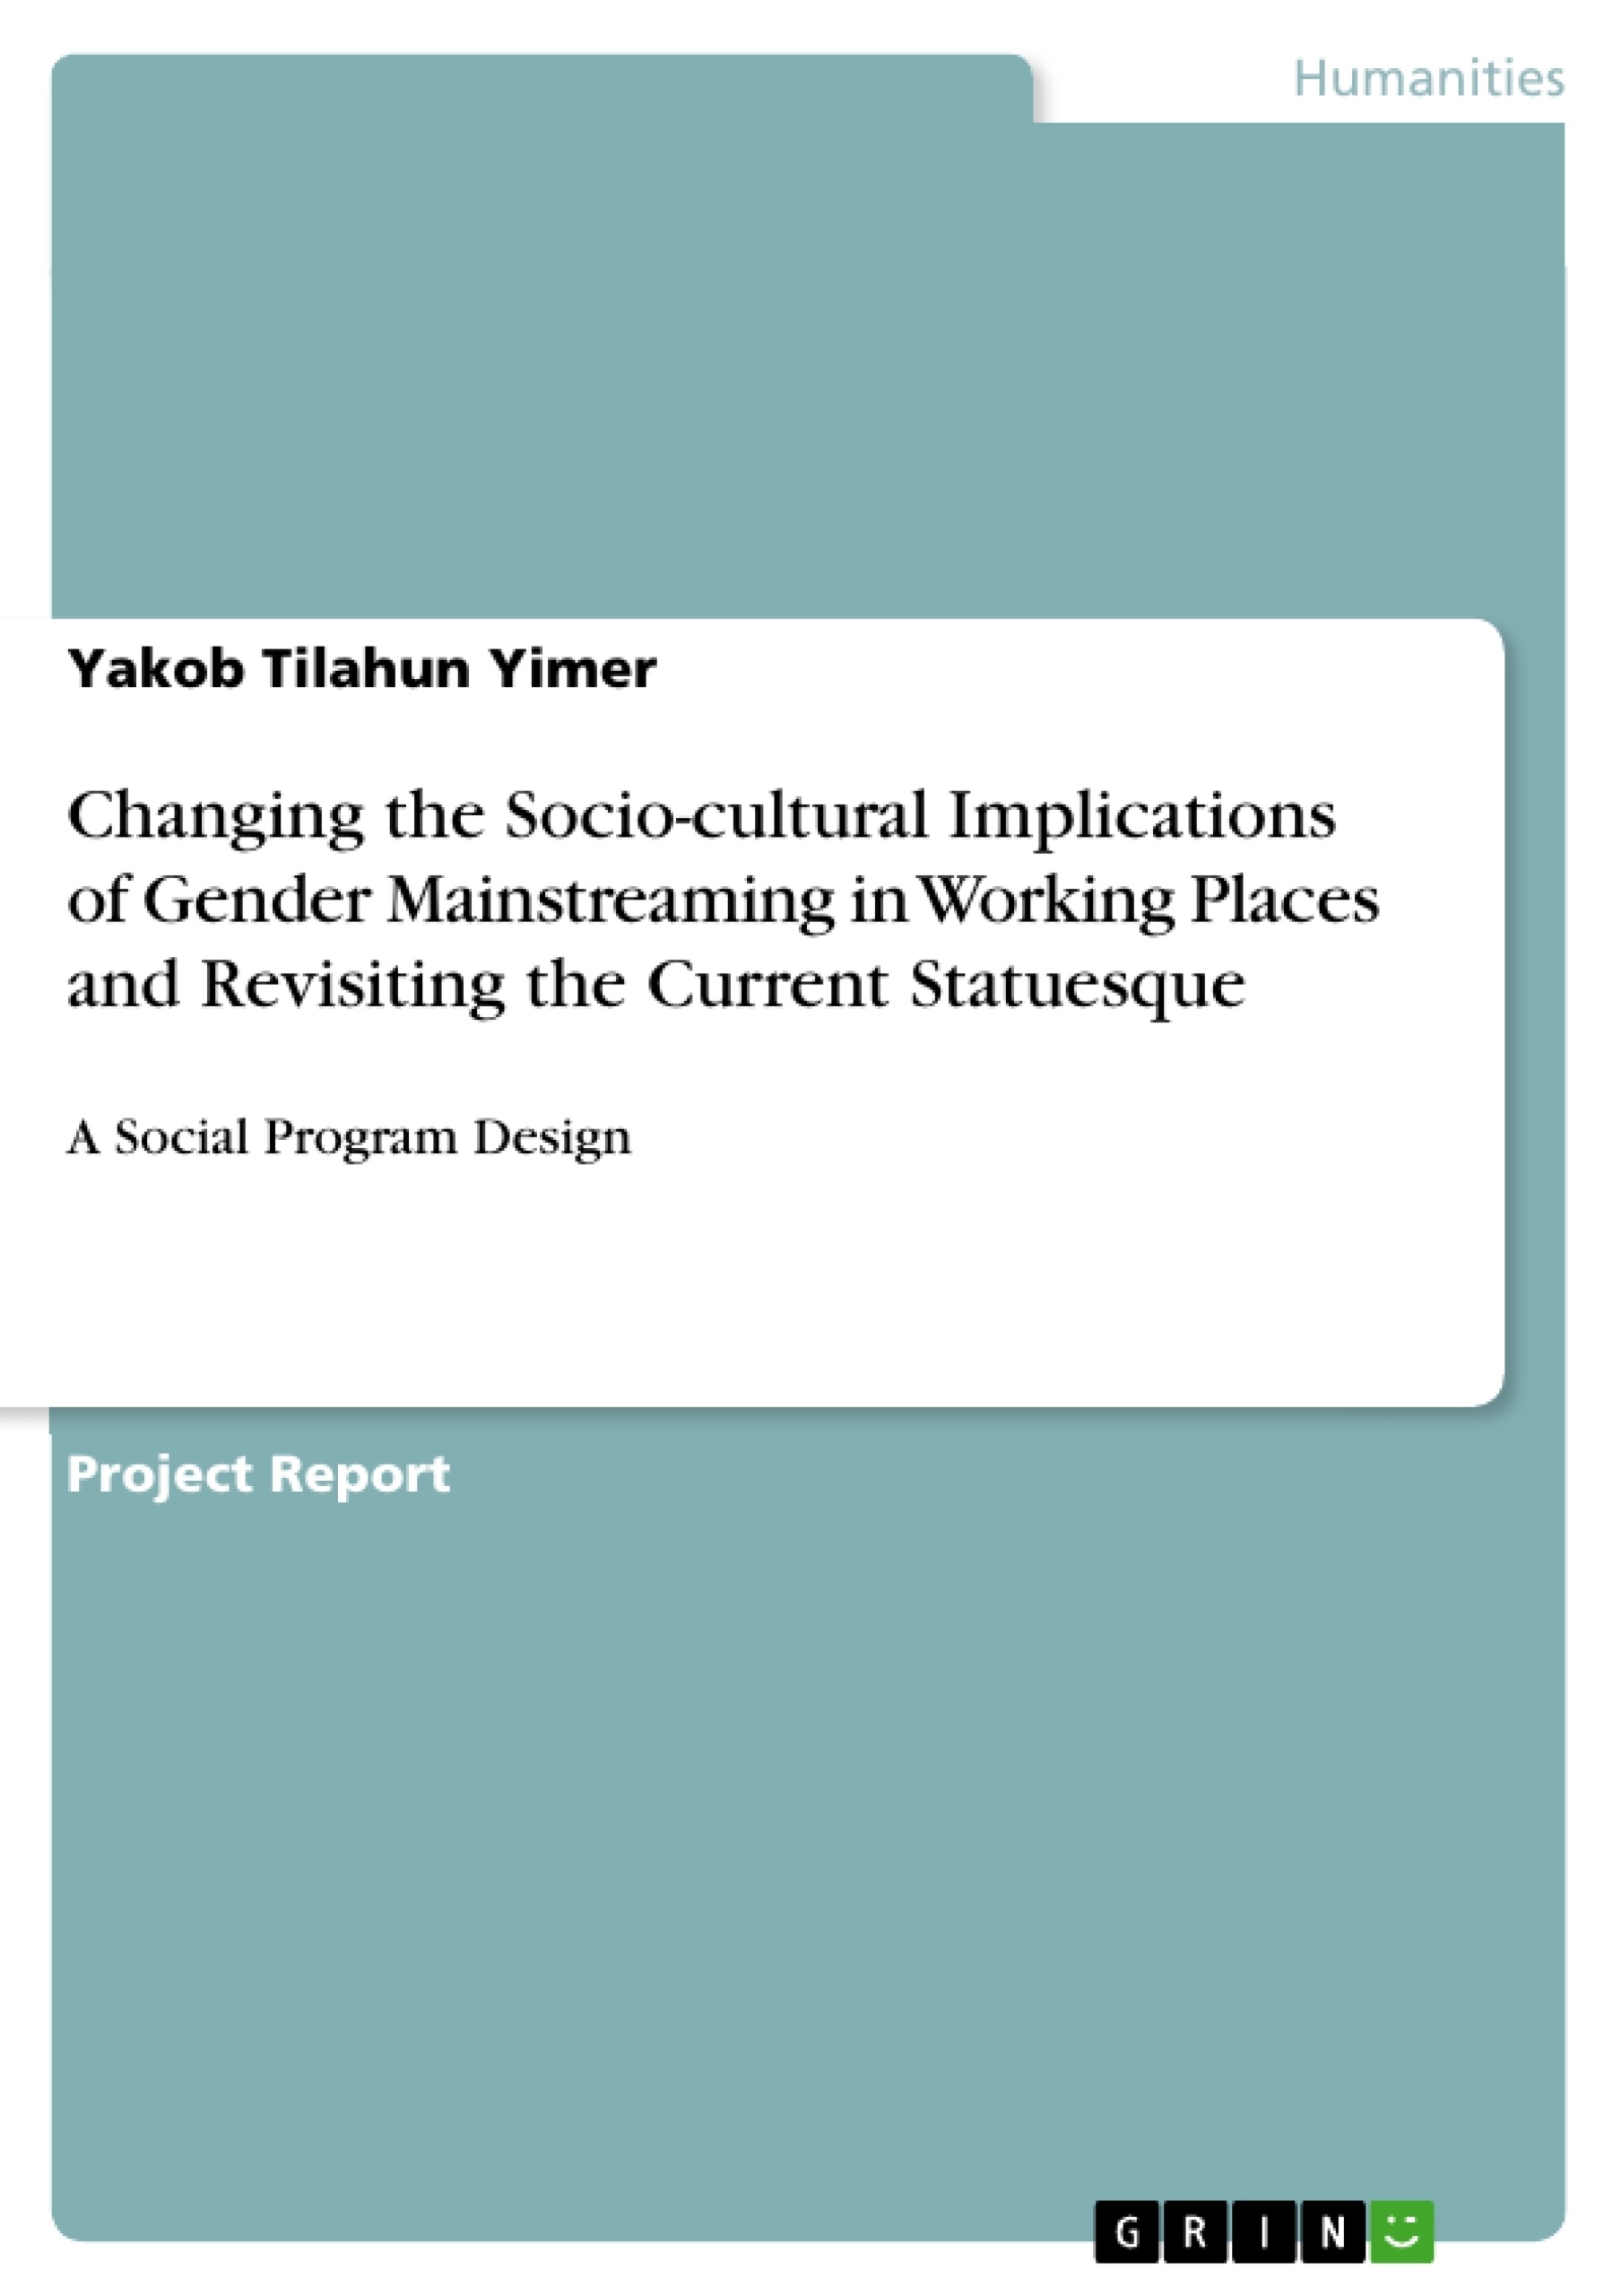 Titre: Changing the Socio-cultural Implications of Gender Mainstreaming in Working Places and Revisiting the Current Statuesque